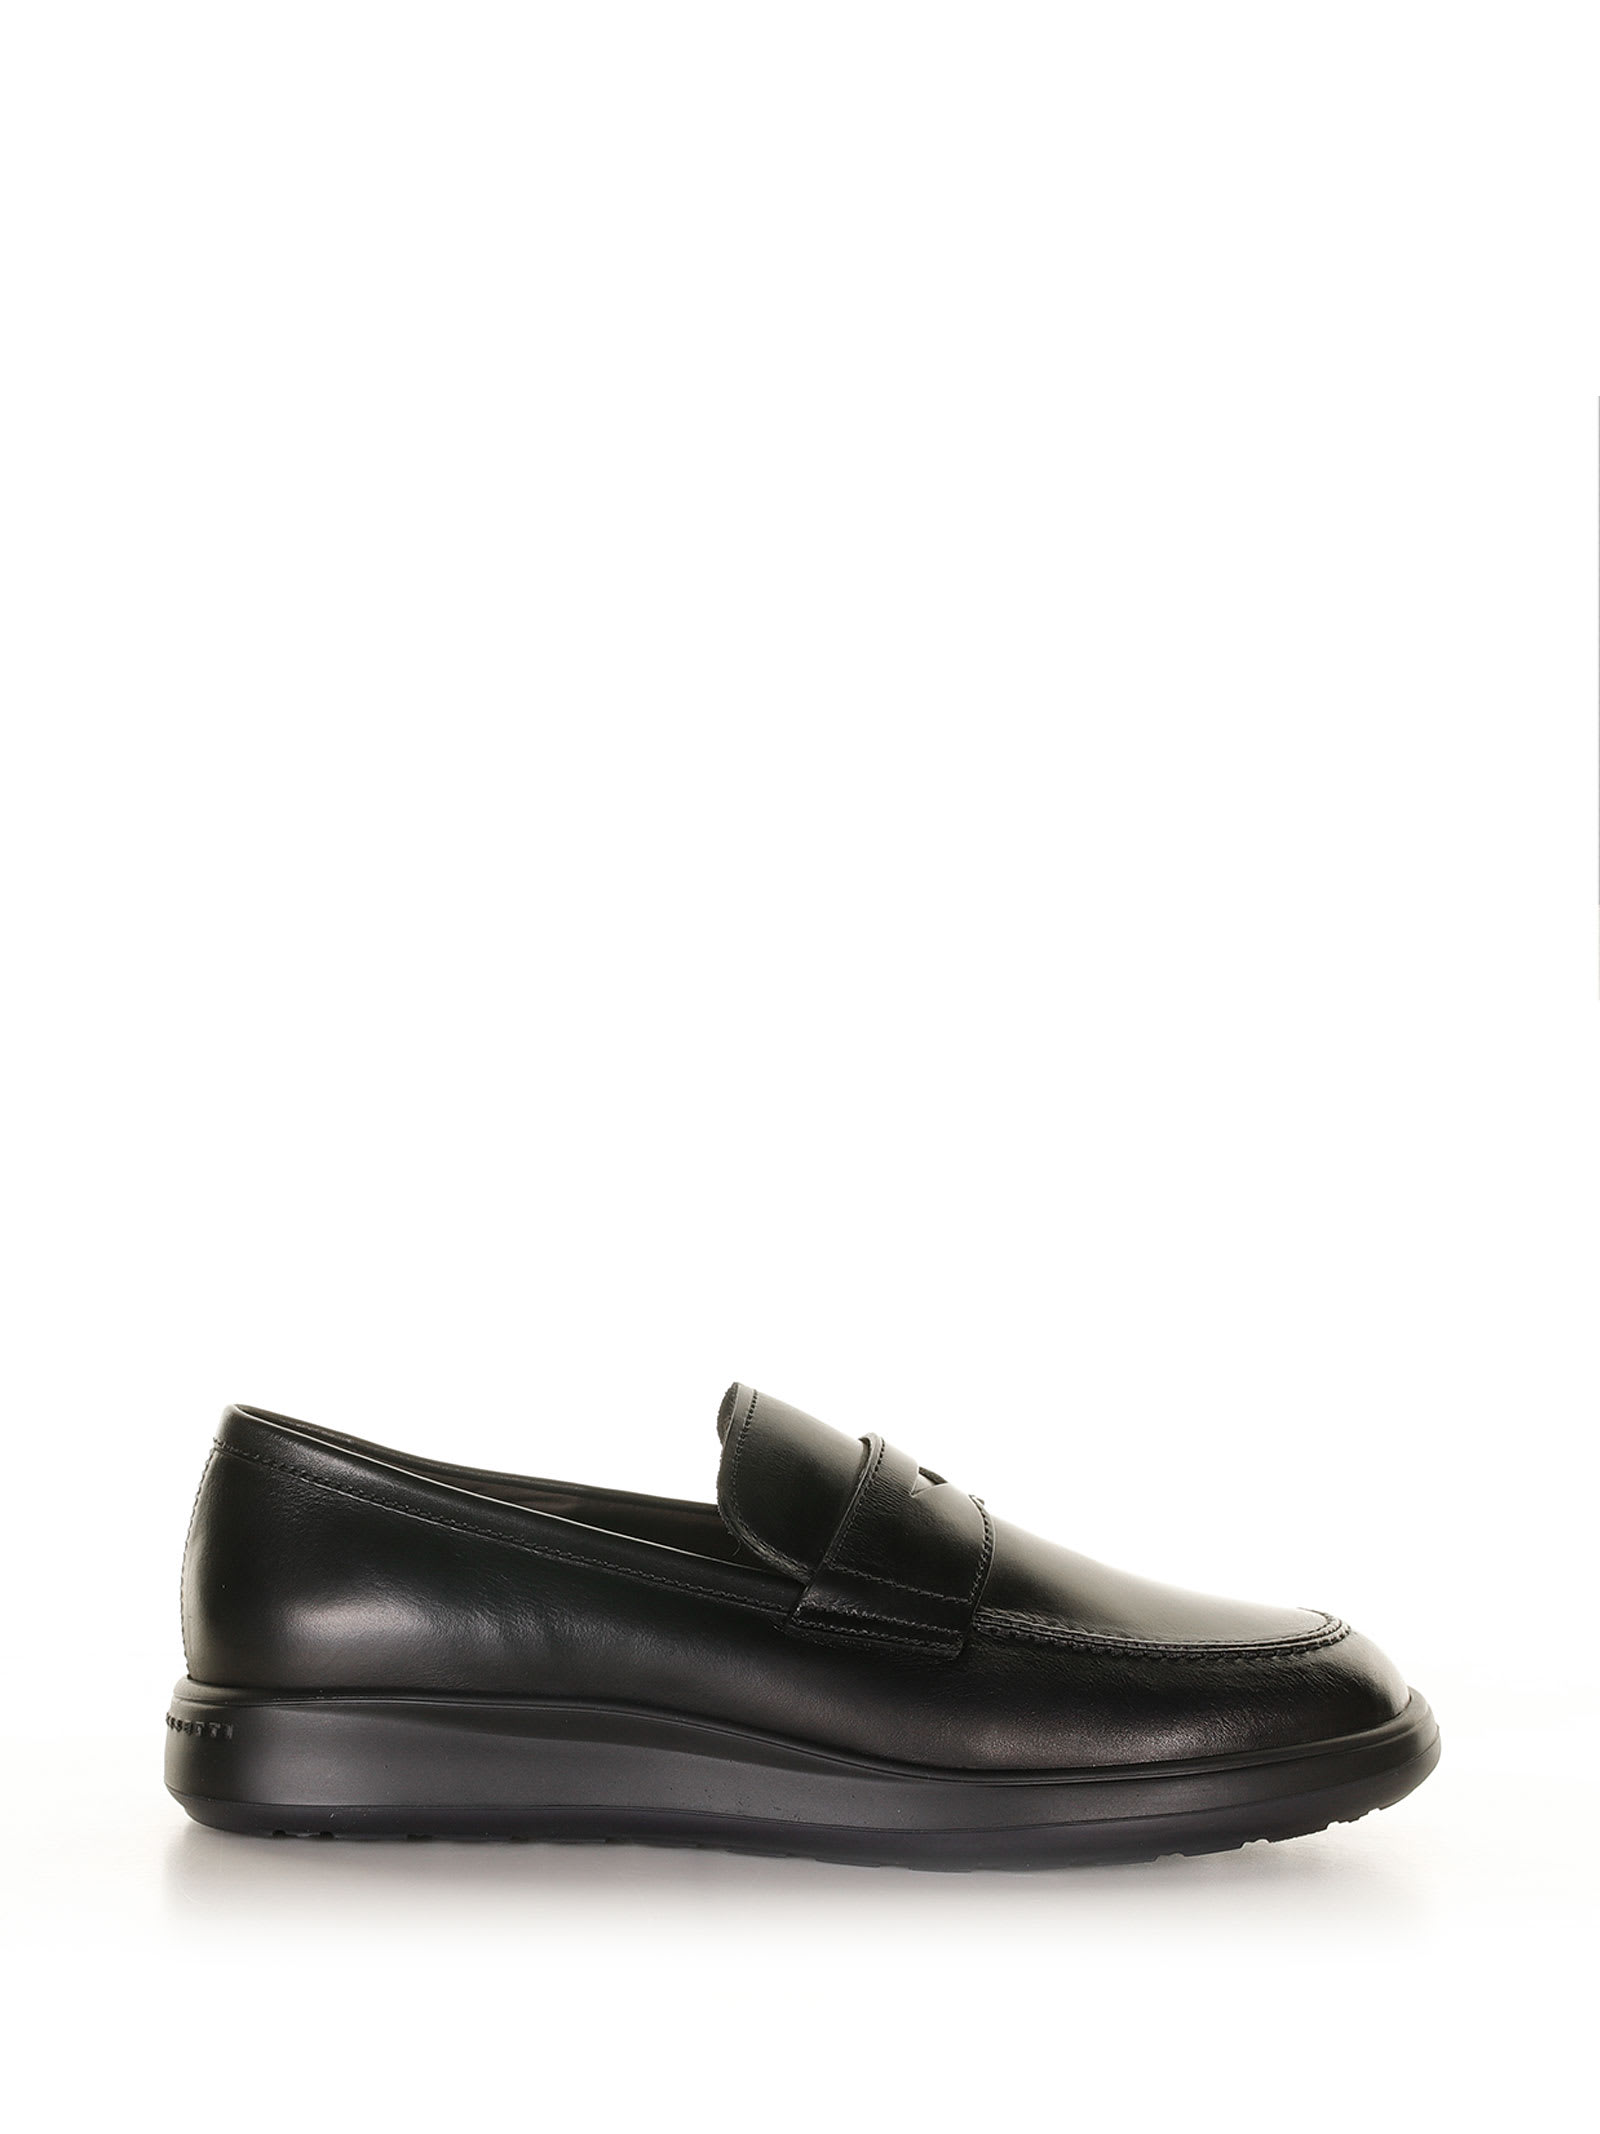 Fratelli Rossetti One Black Leather Loafers